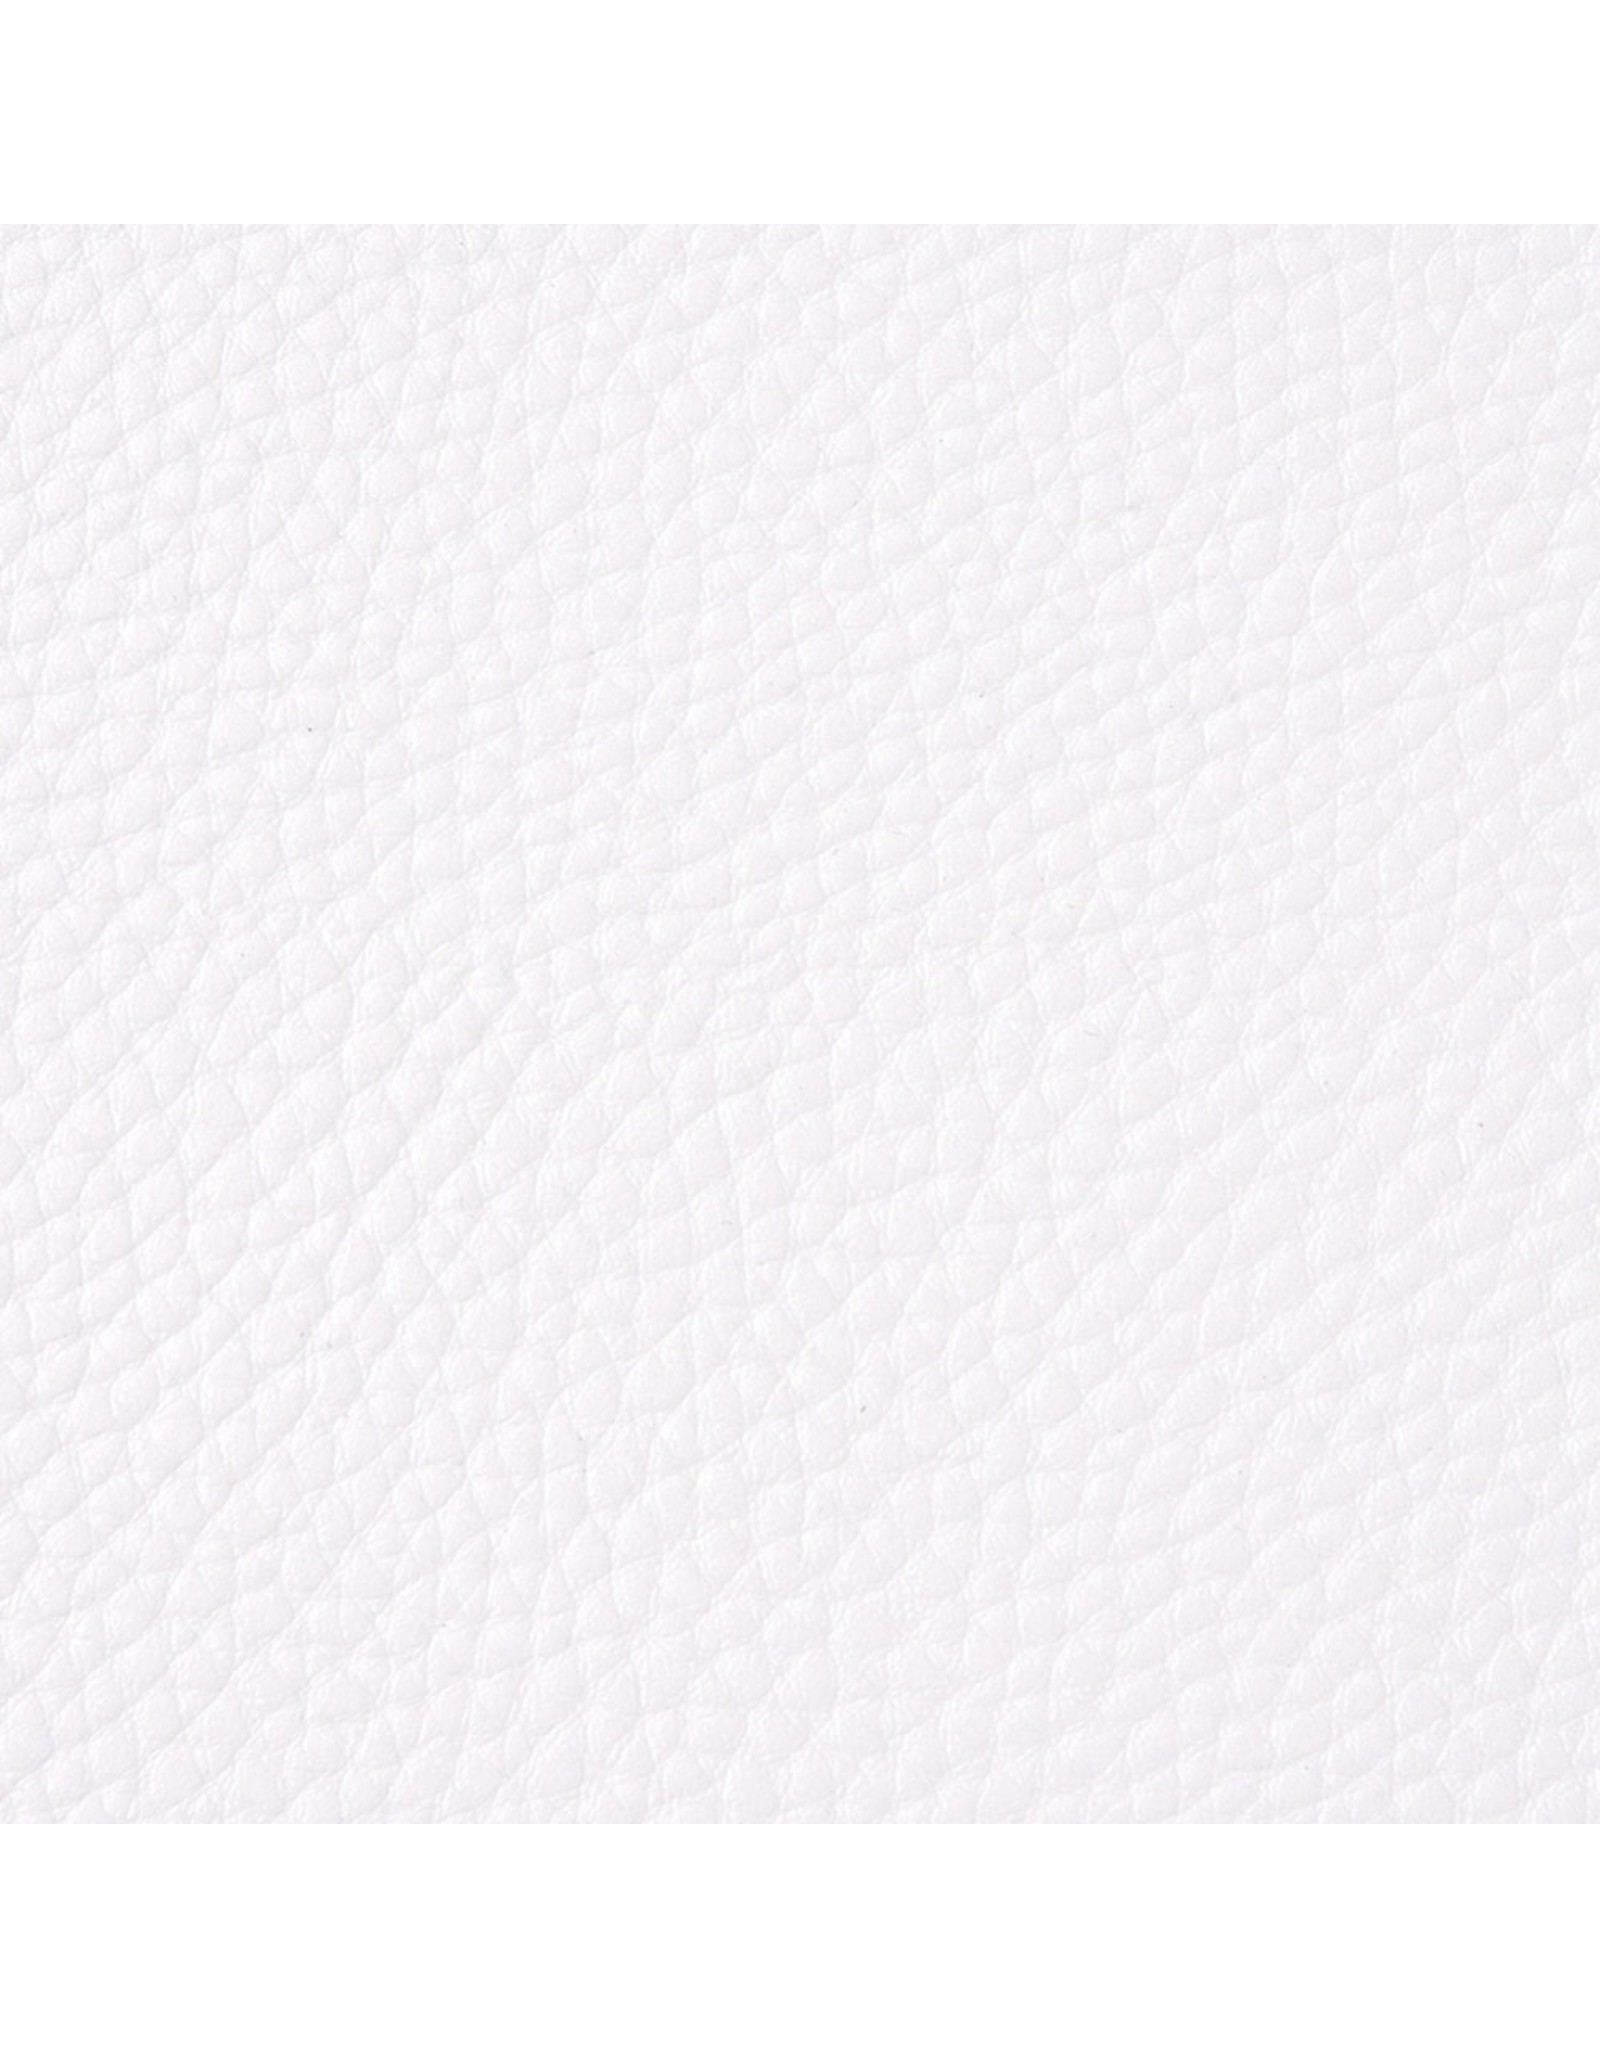 Faux Leather Beading Backing White .5mm thick 8x12"